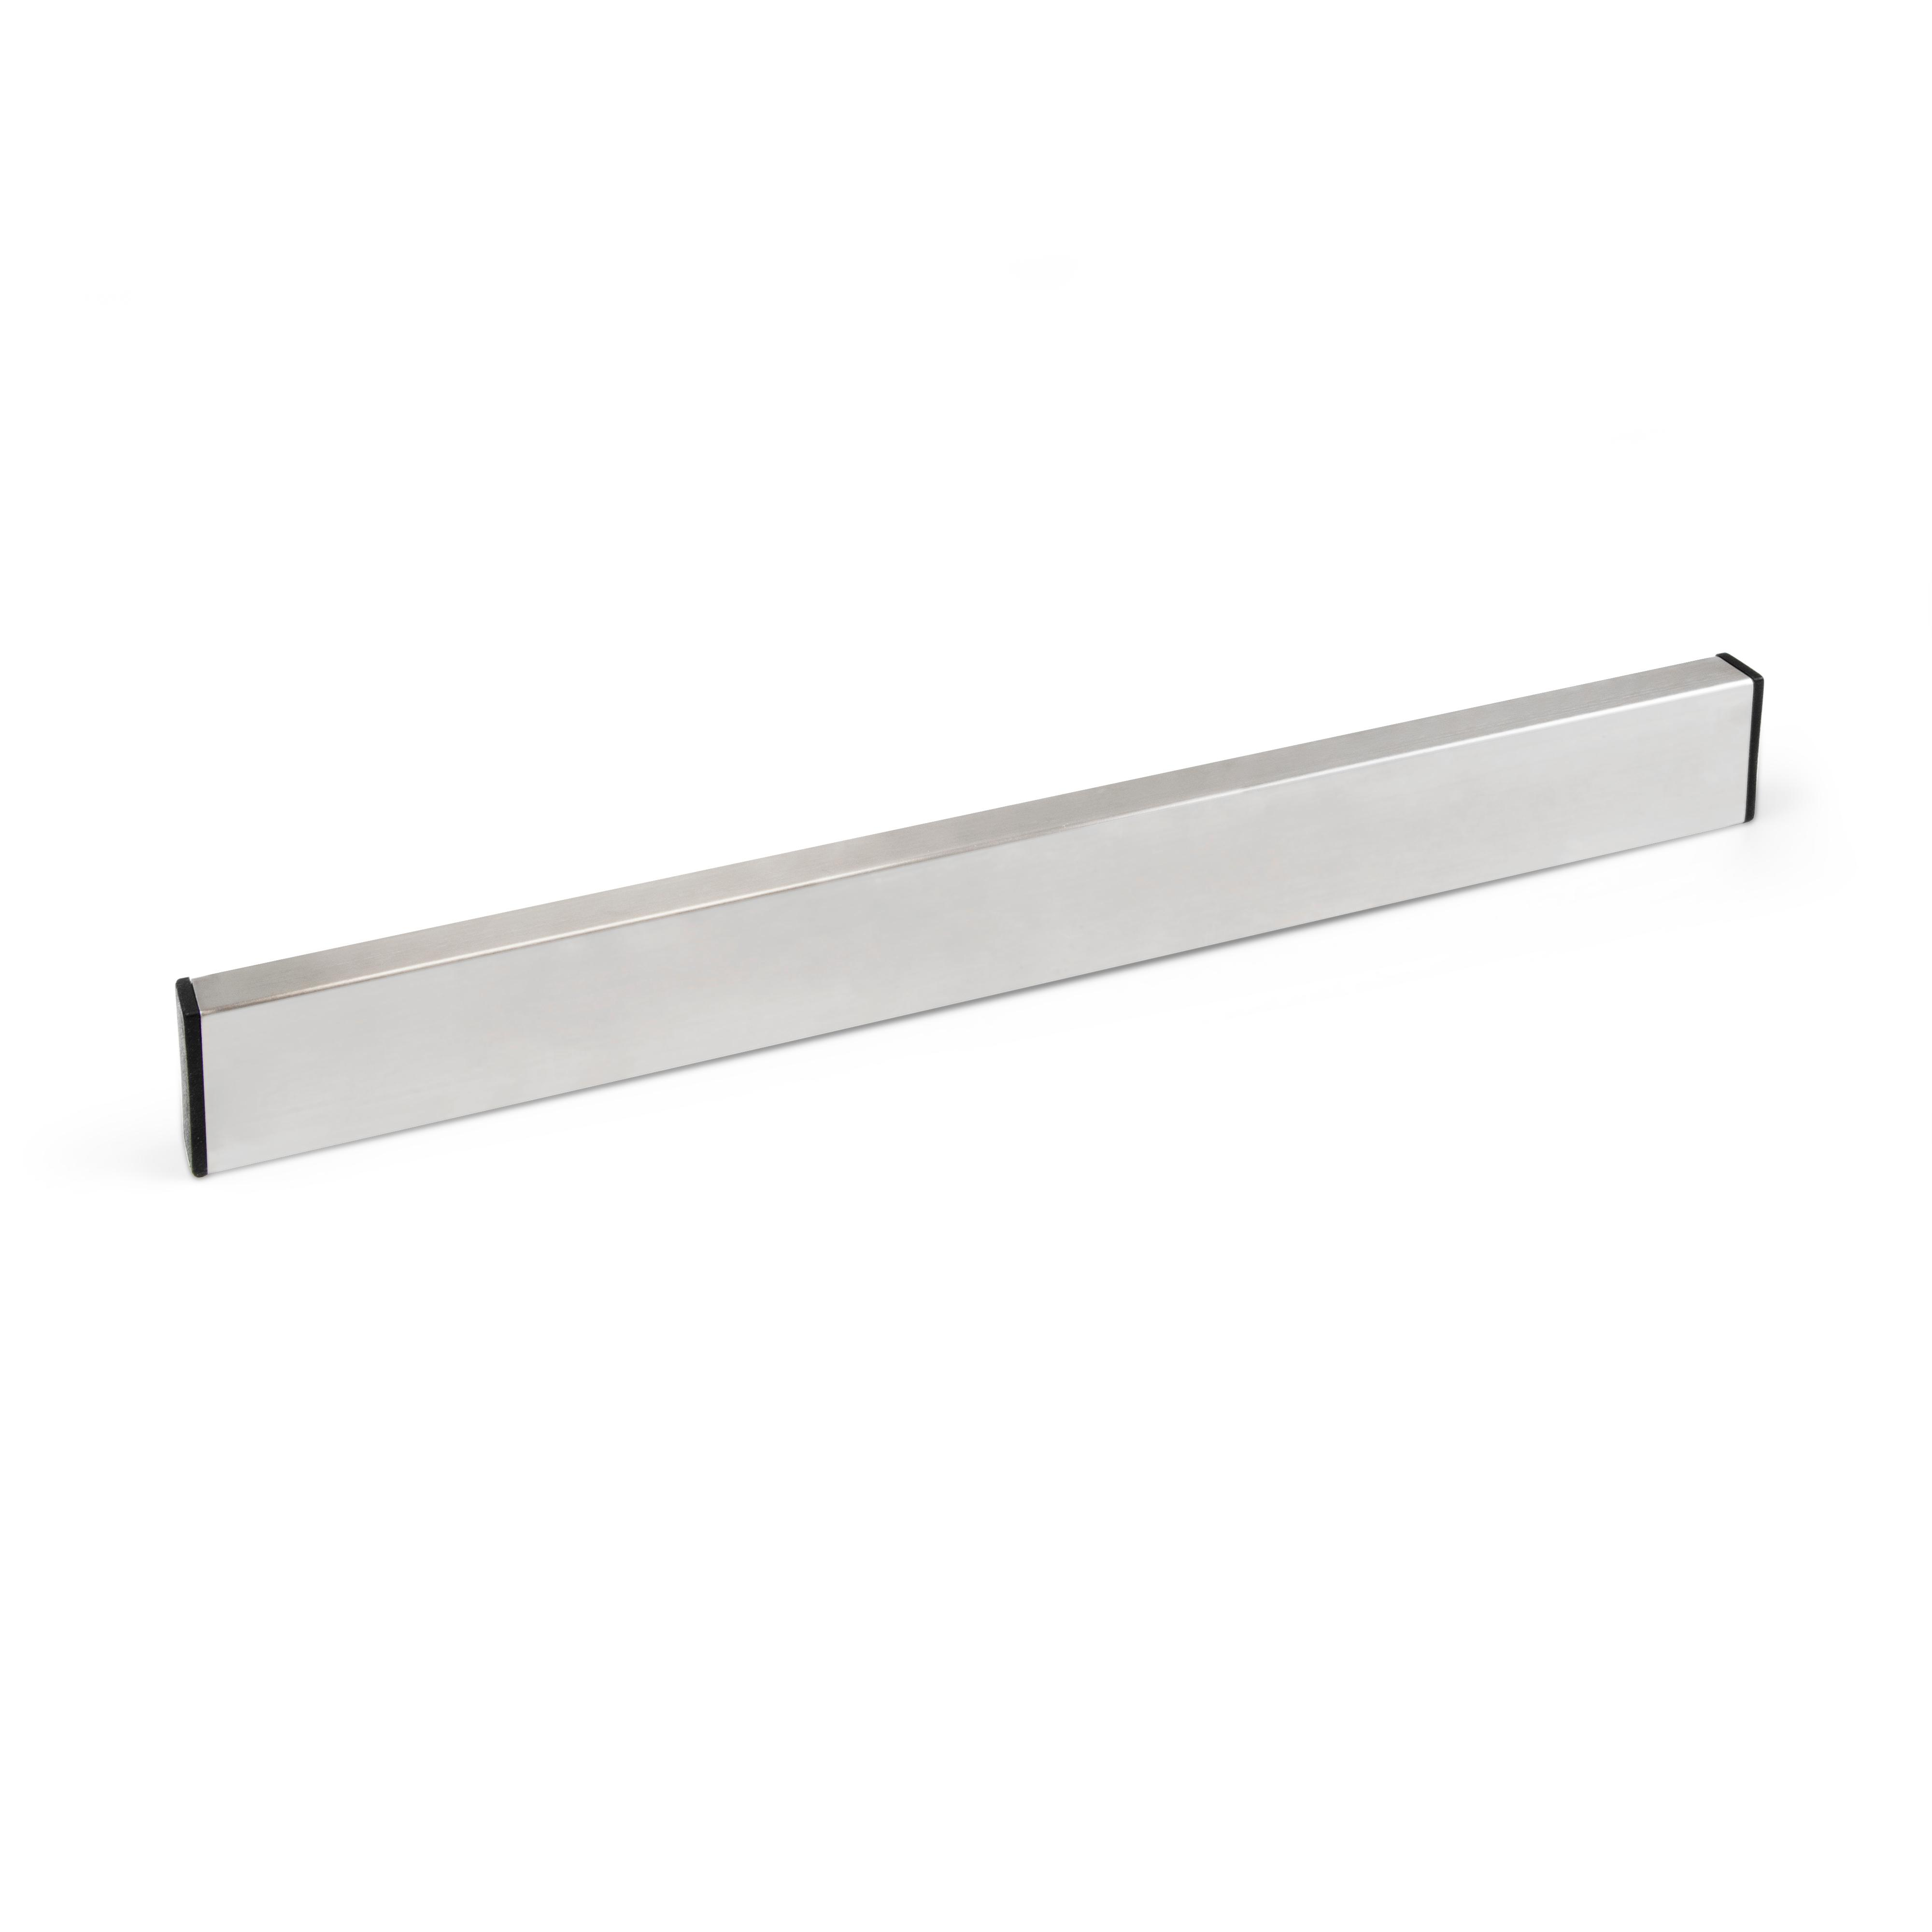 Wall-mounted magnetic bar for kitchen knives 400 mm, stainless steel